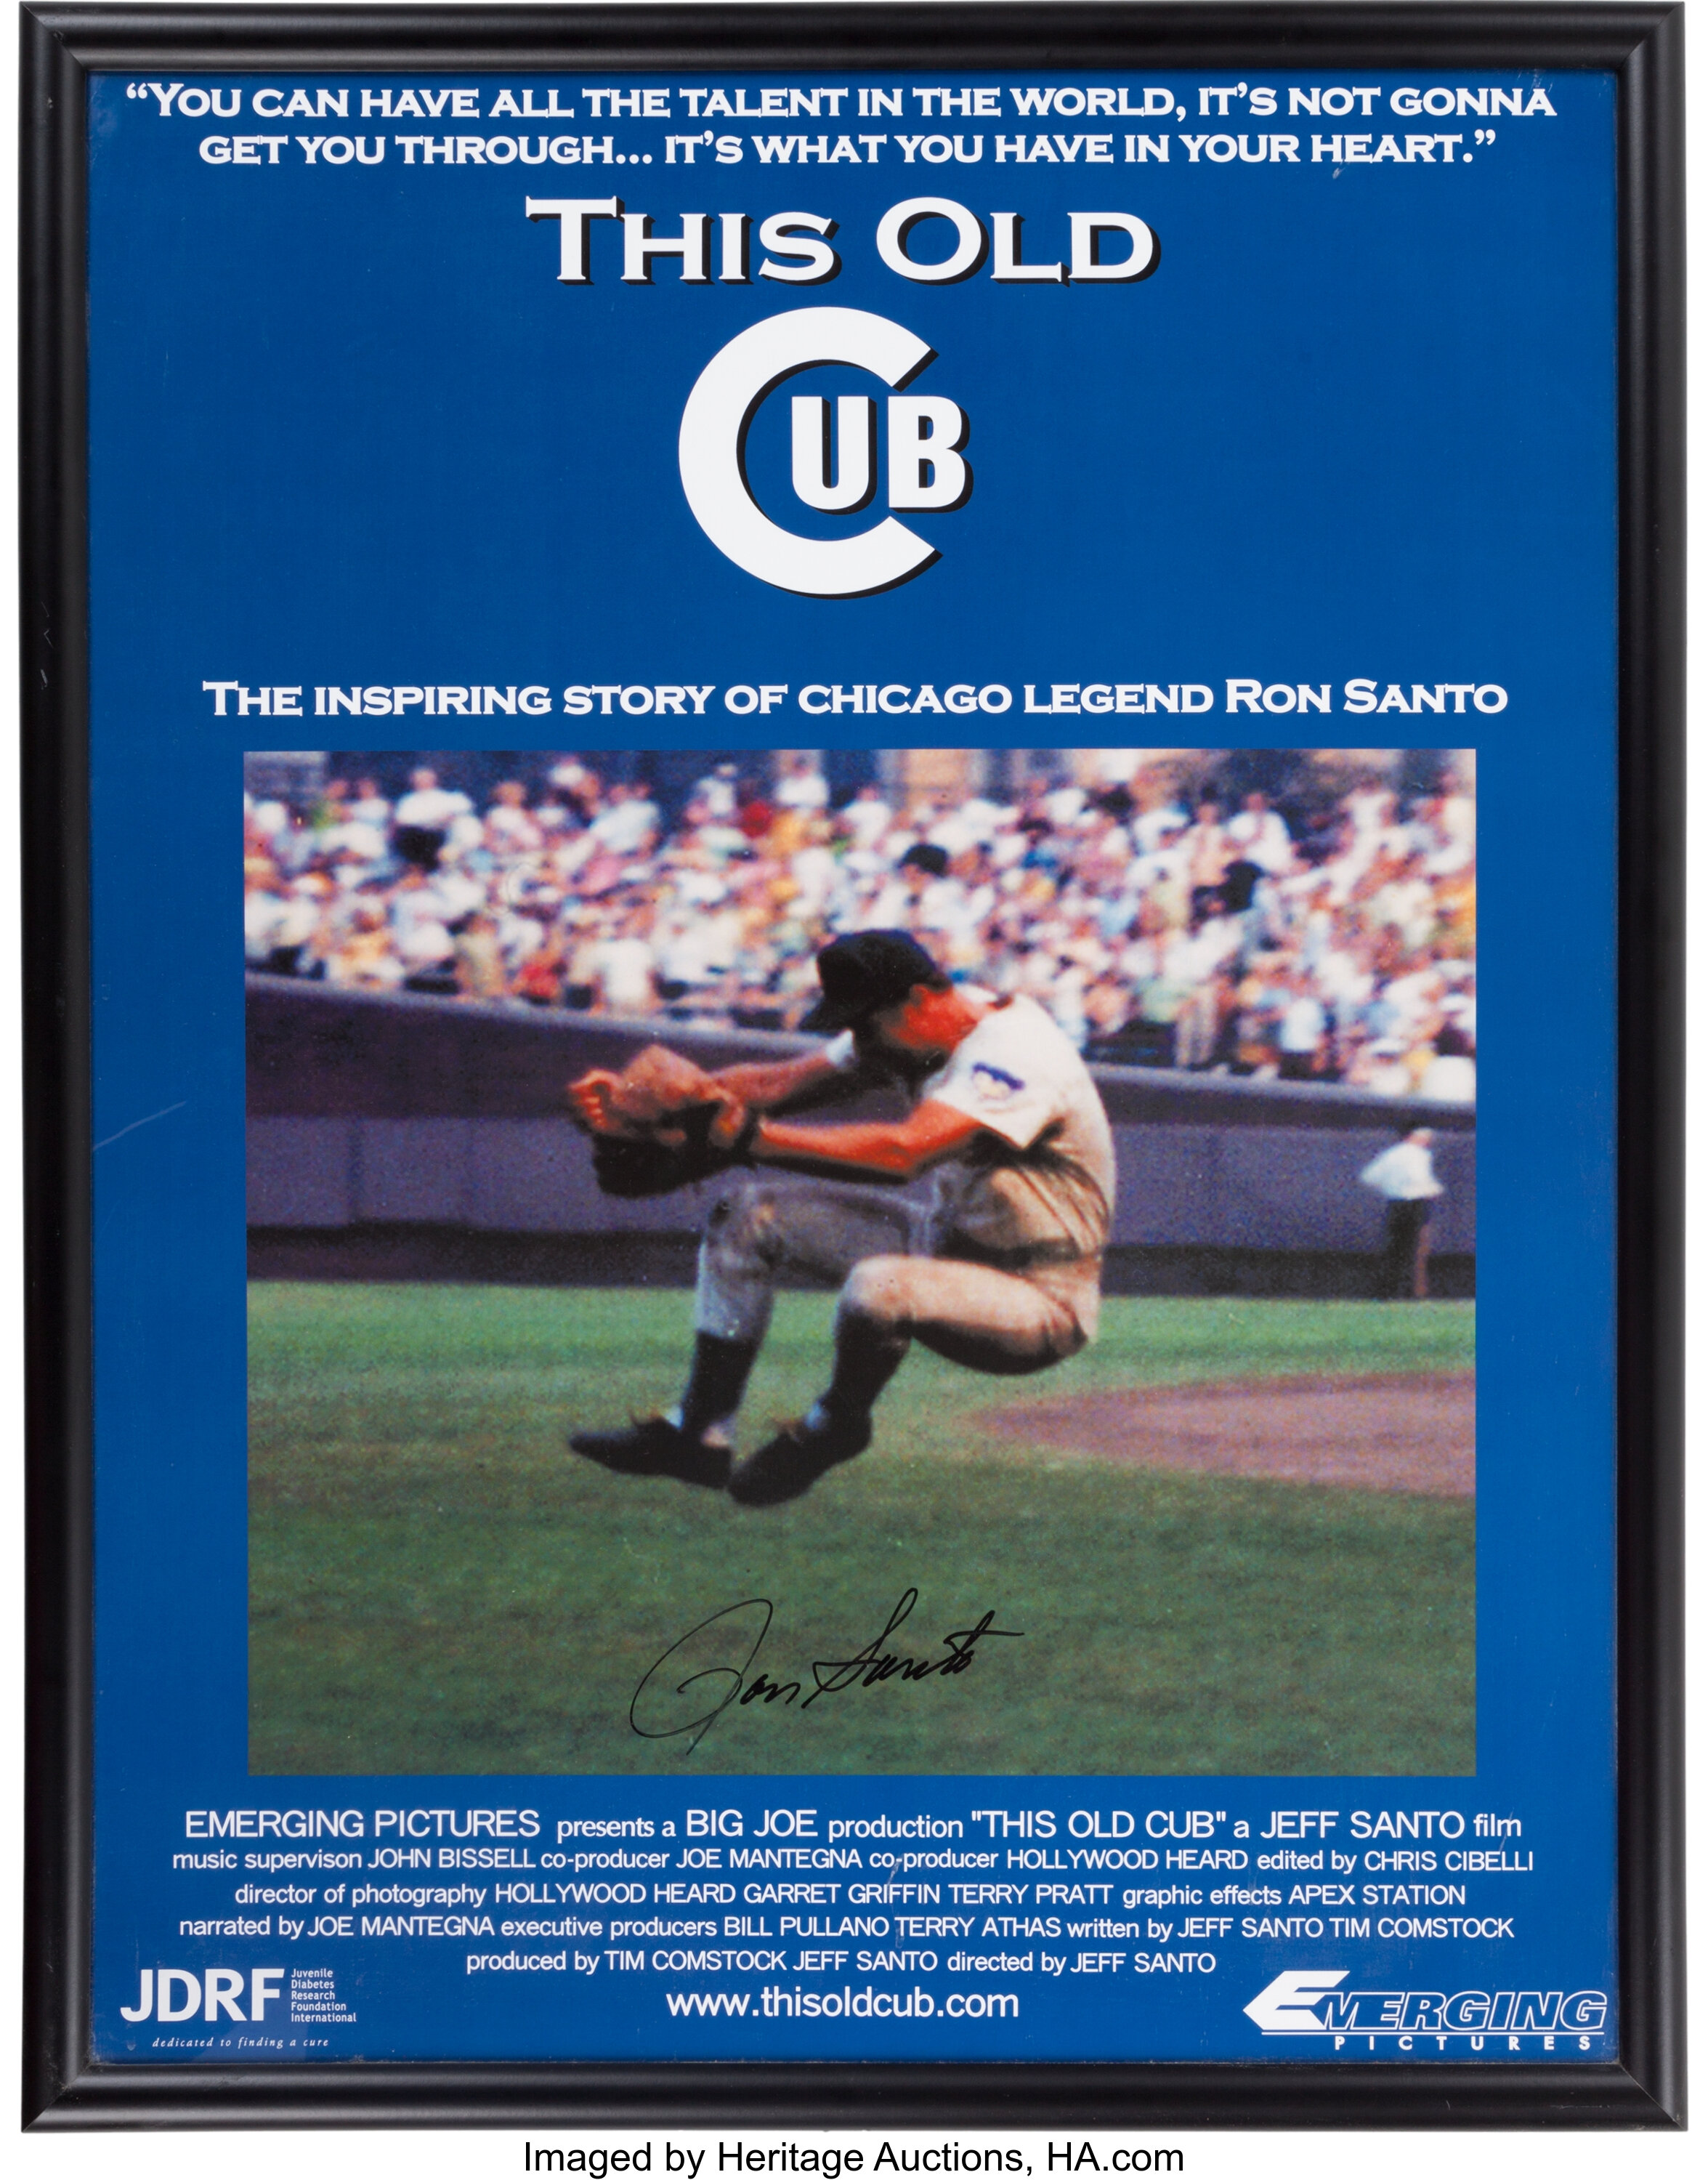 2004 Ron Santo This Old Cub Signed Movie Poster.  Baseball, Lot #83210